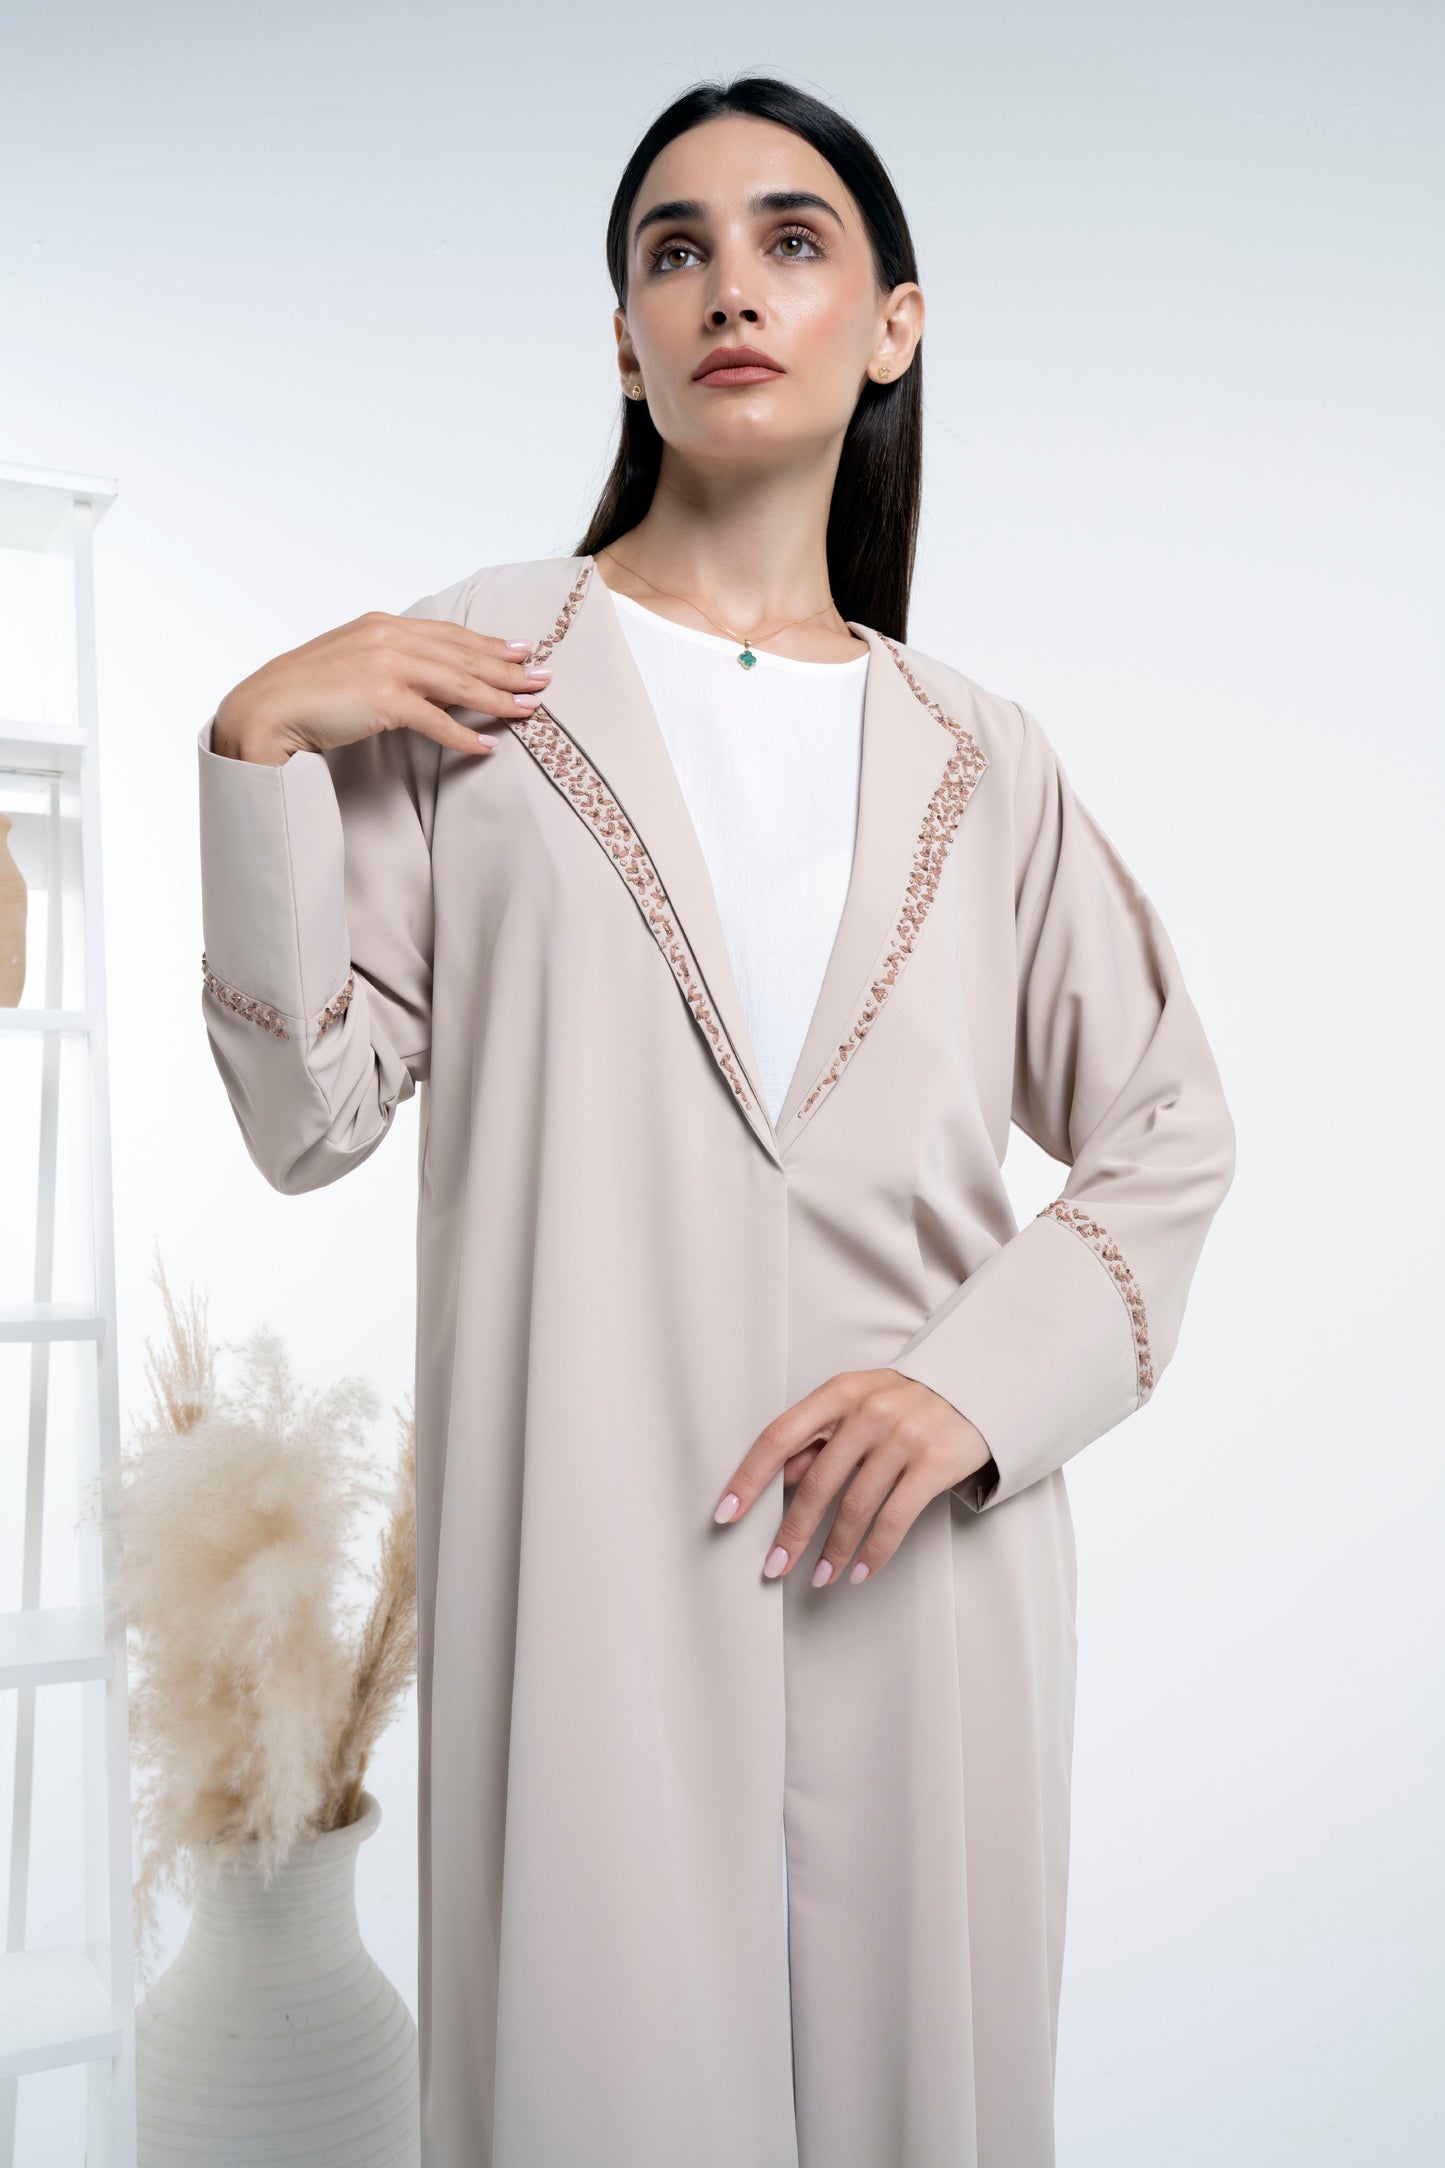 Beige abaya having double collar with floral embroidery on sleeves and collar 